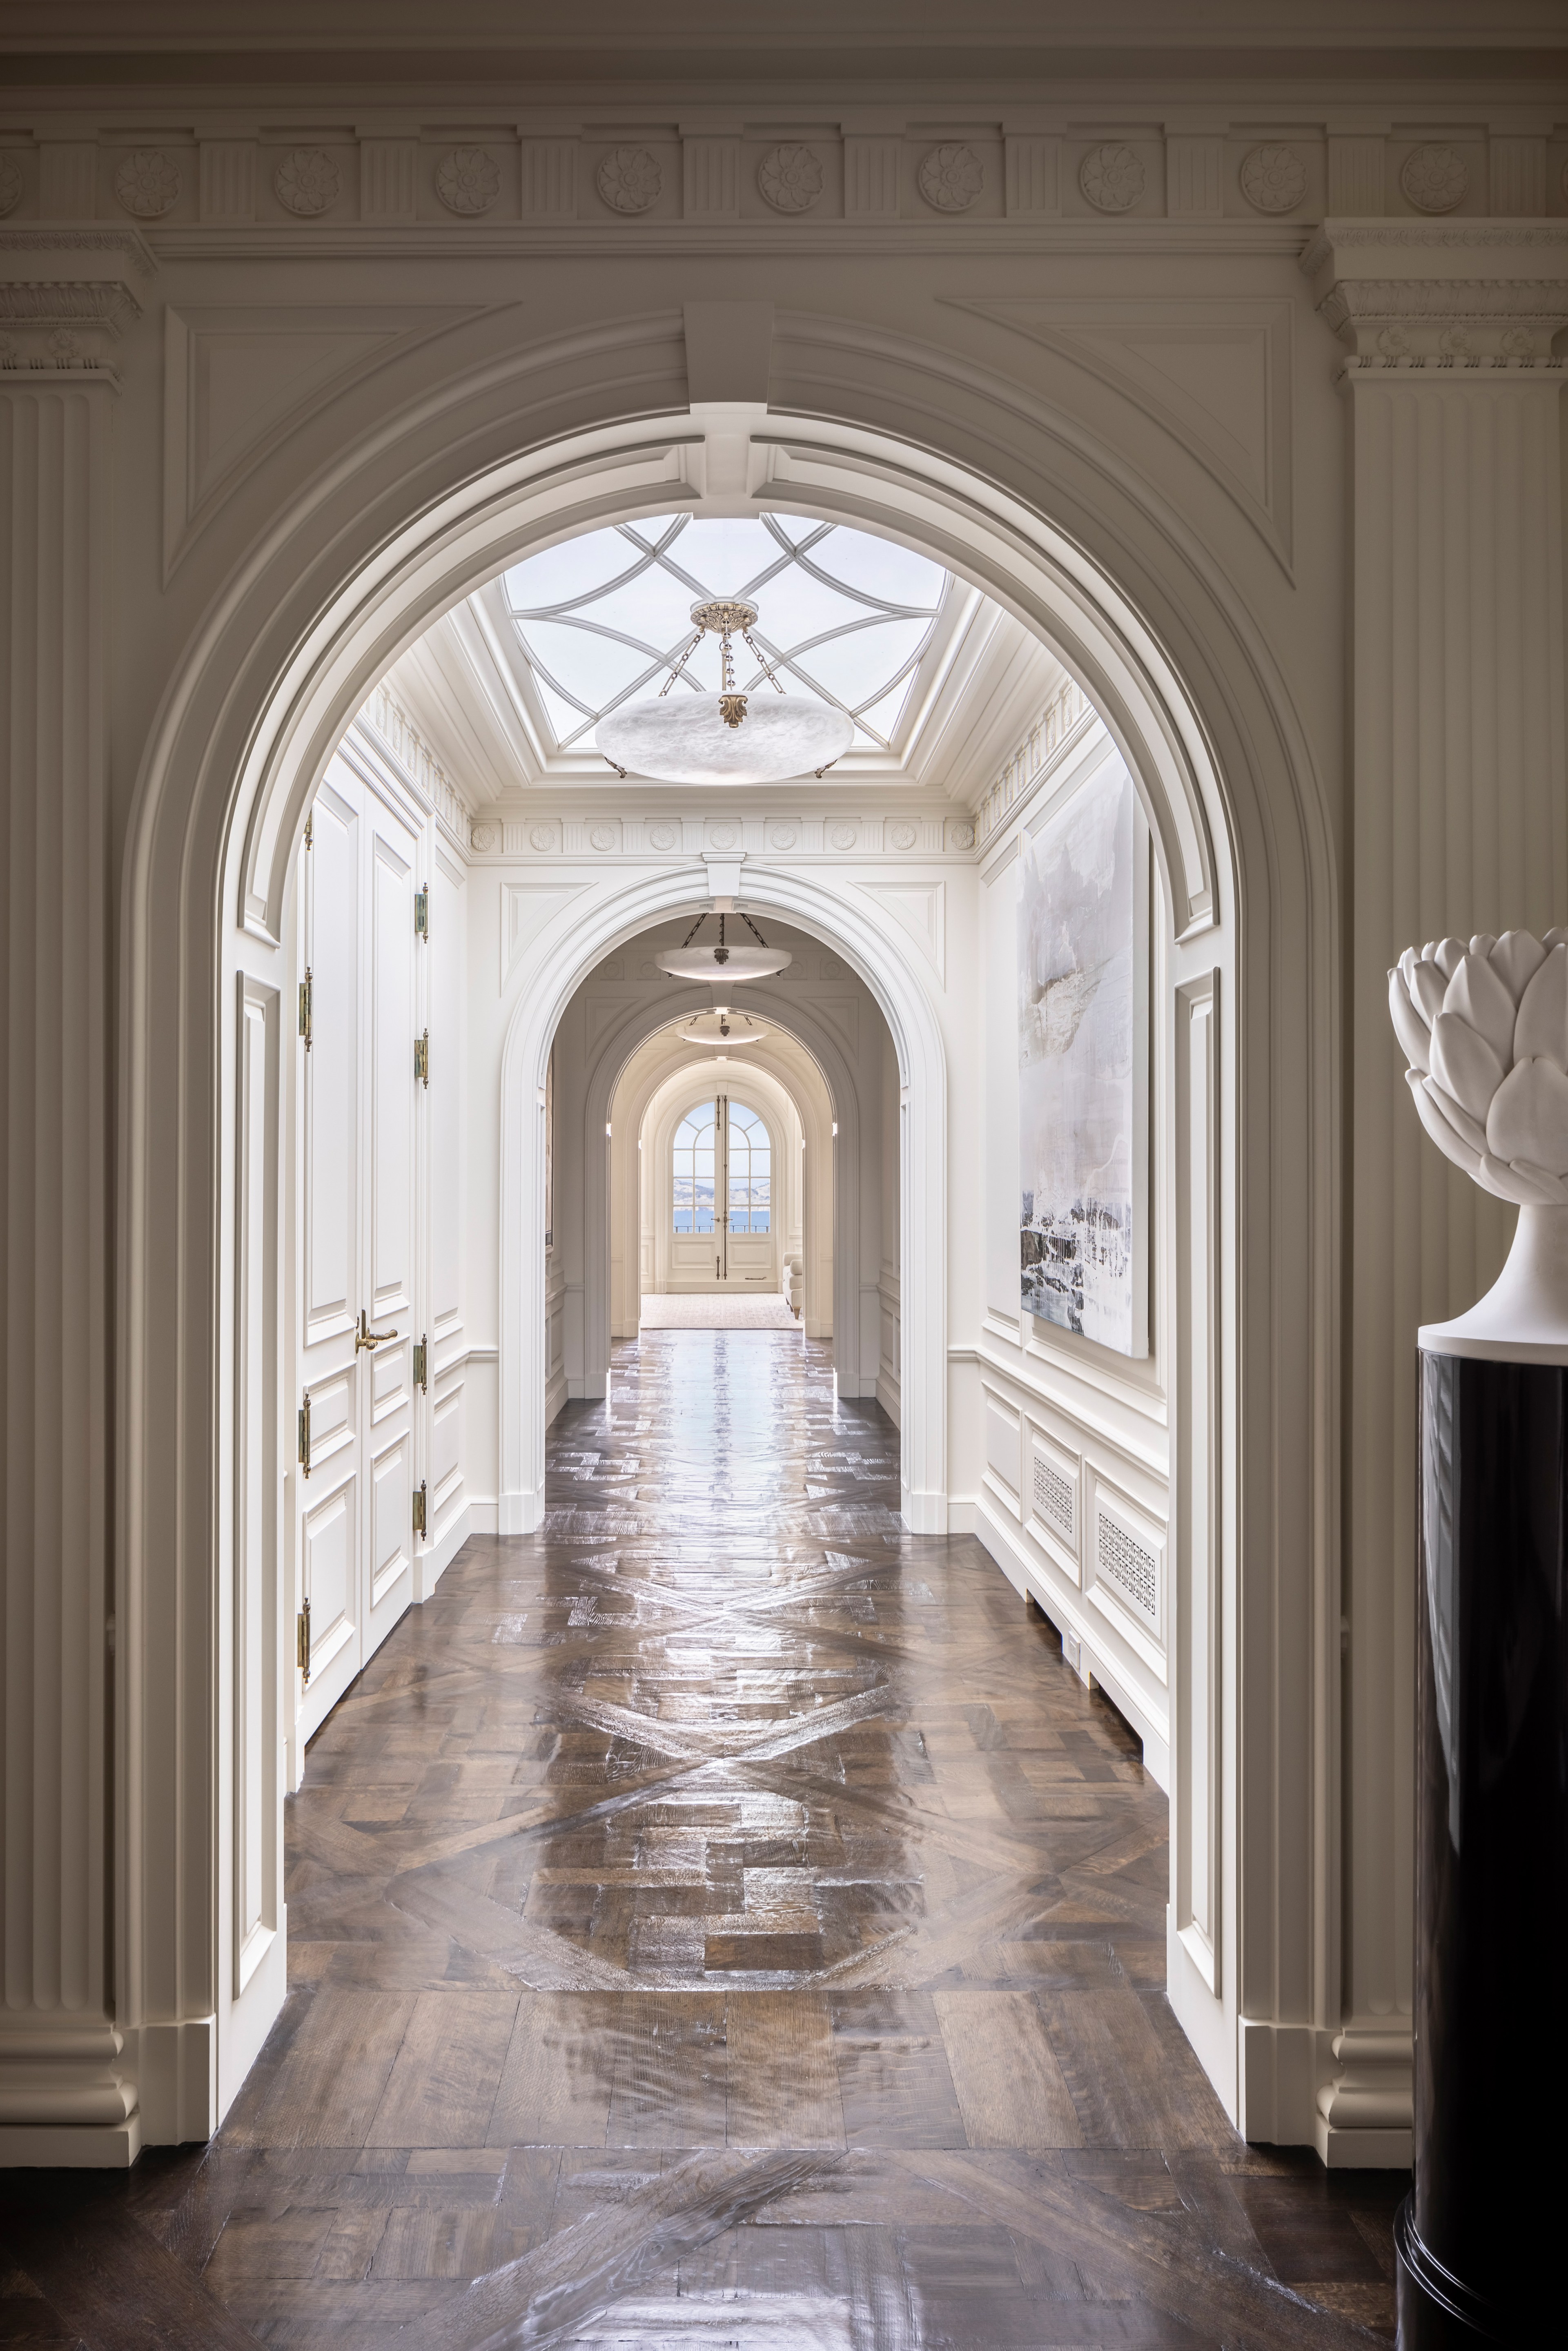 An arched entryway leads into a white-painted wooden-floored hall.